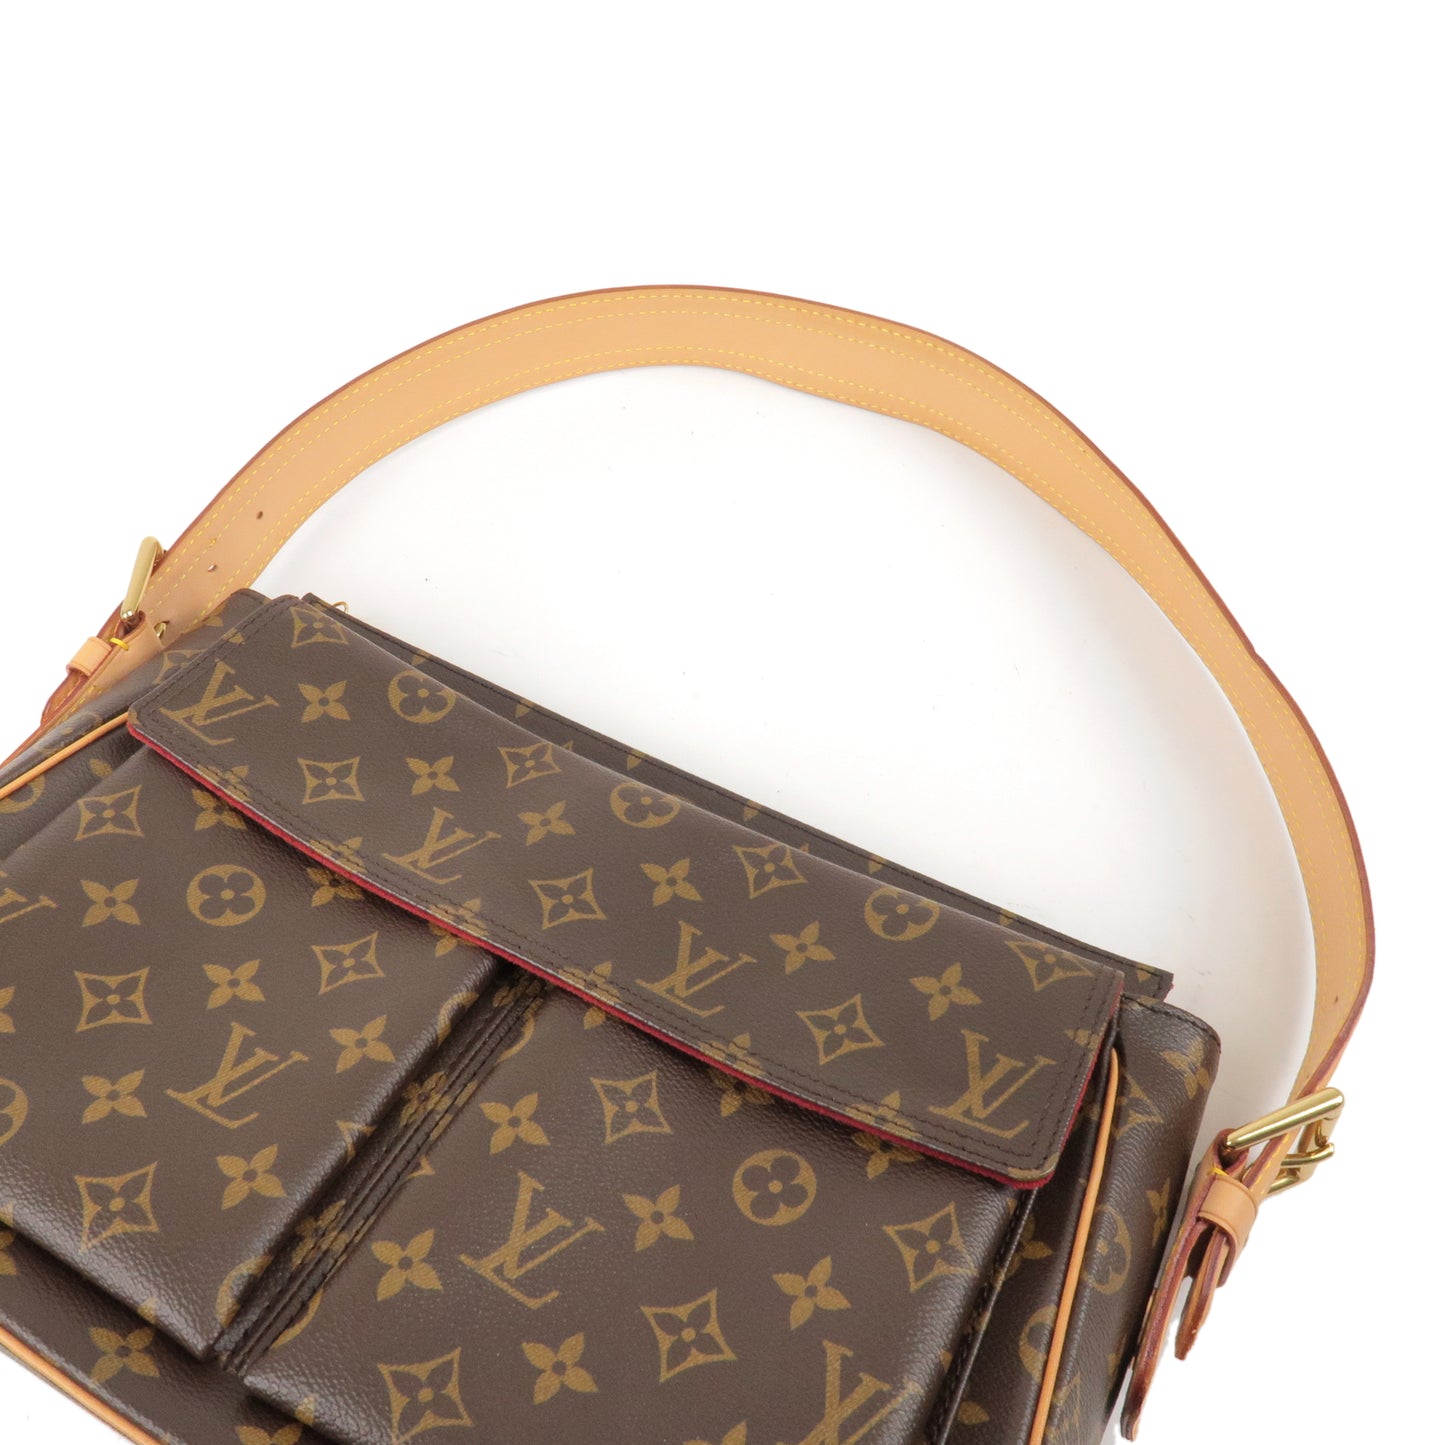 Buy [Used] Louis Vuitton Monogram Vibasite GM One Shoulder Bag Shoulder Bag  M51163 Brown PVC Bag M51163 from Japan - Buy authentic Plus exclusive items  from Japan